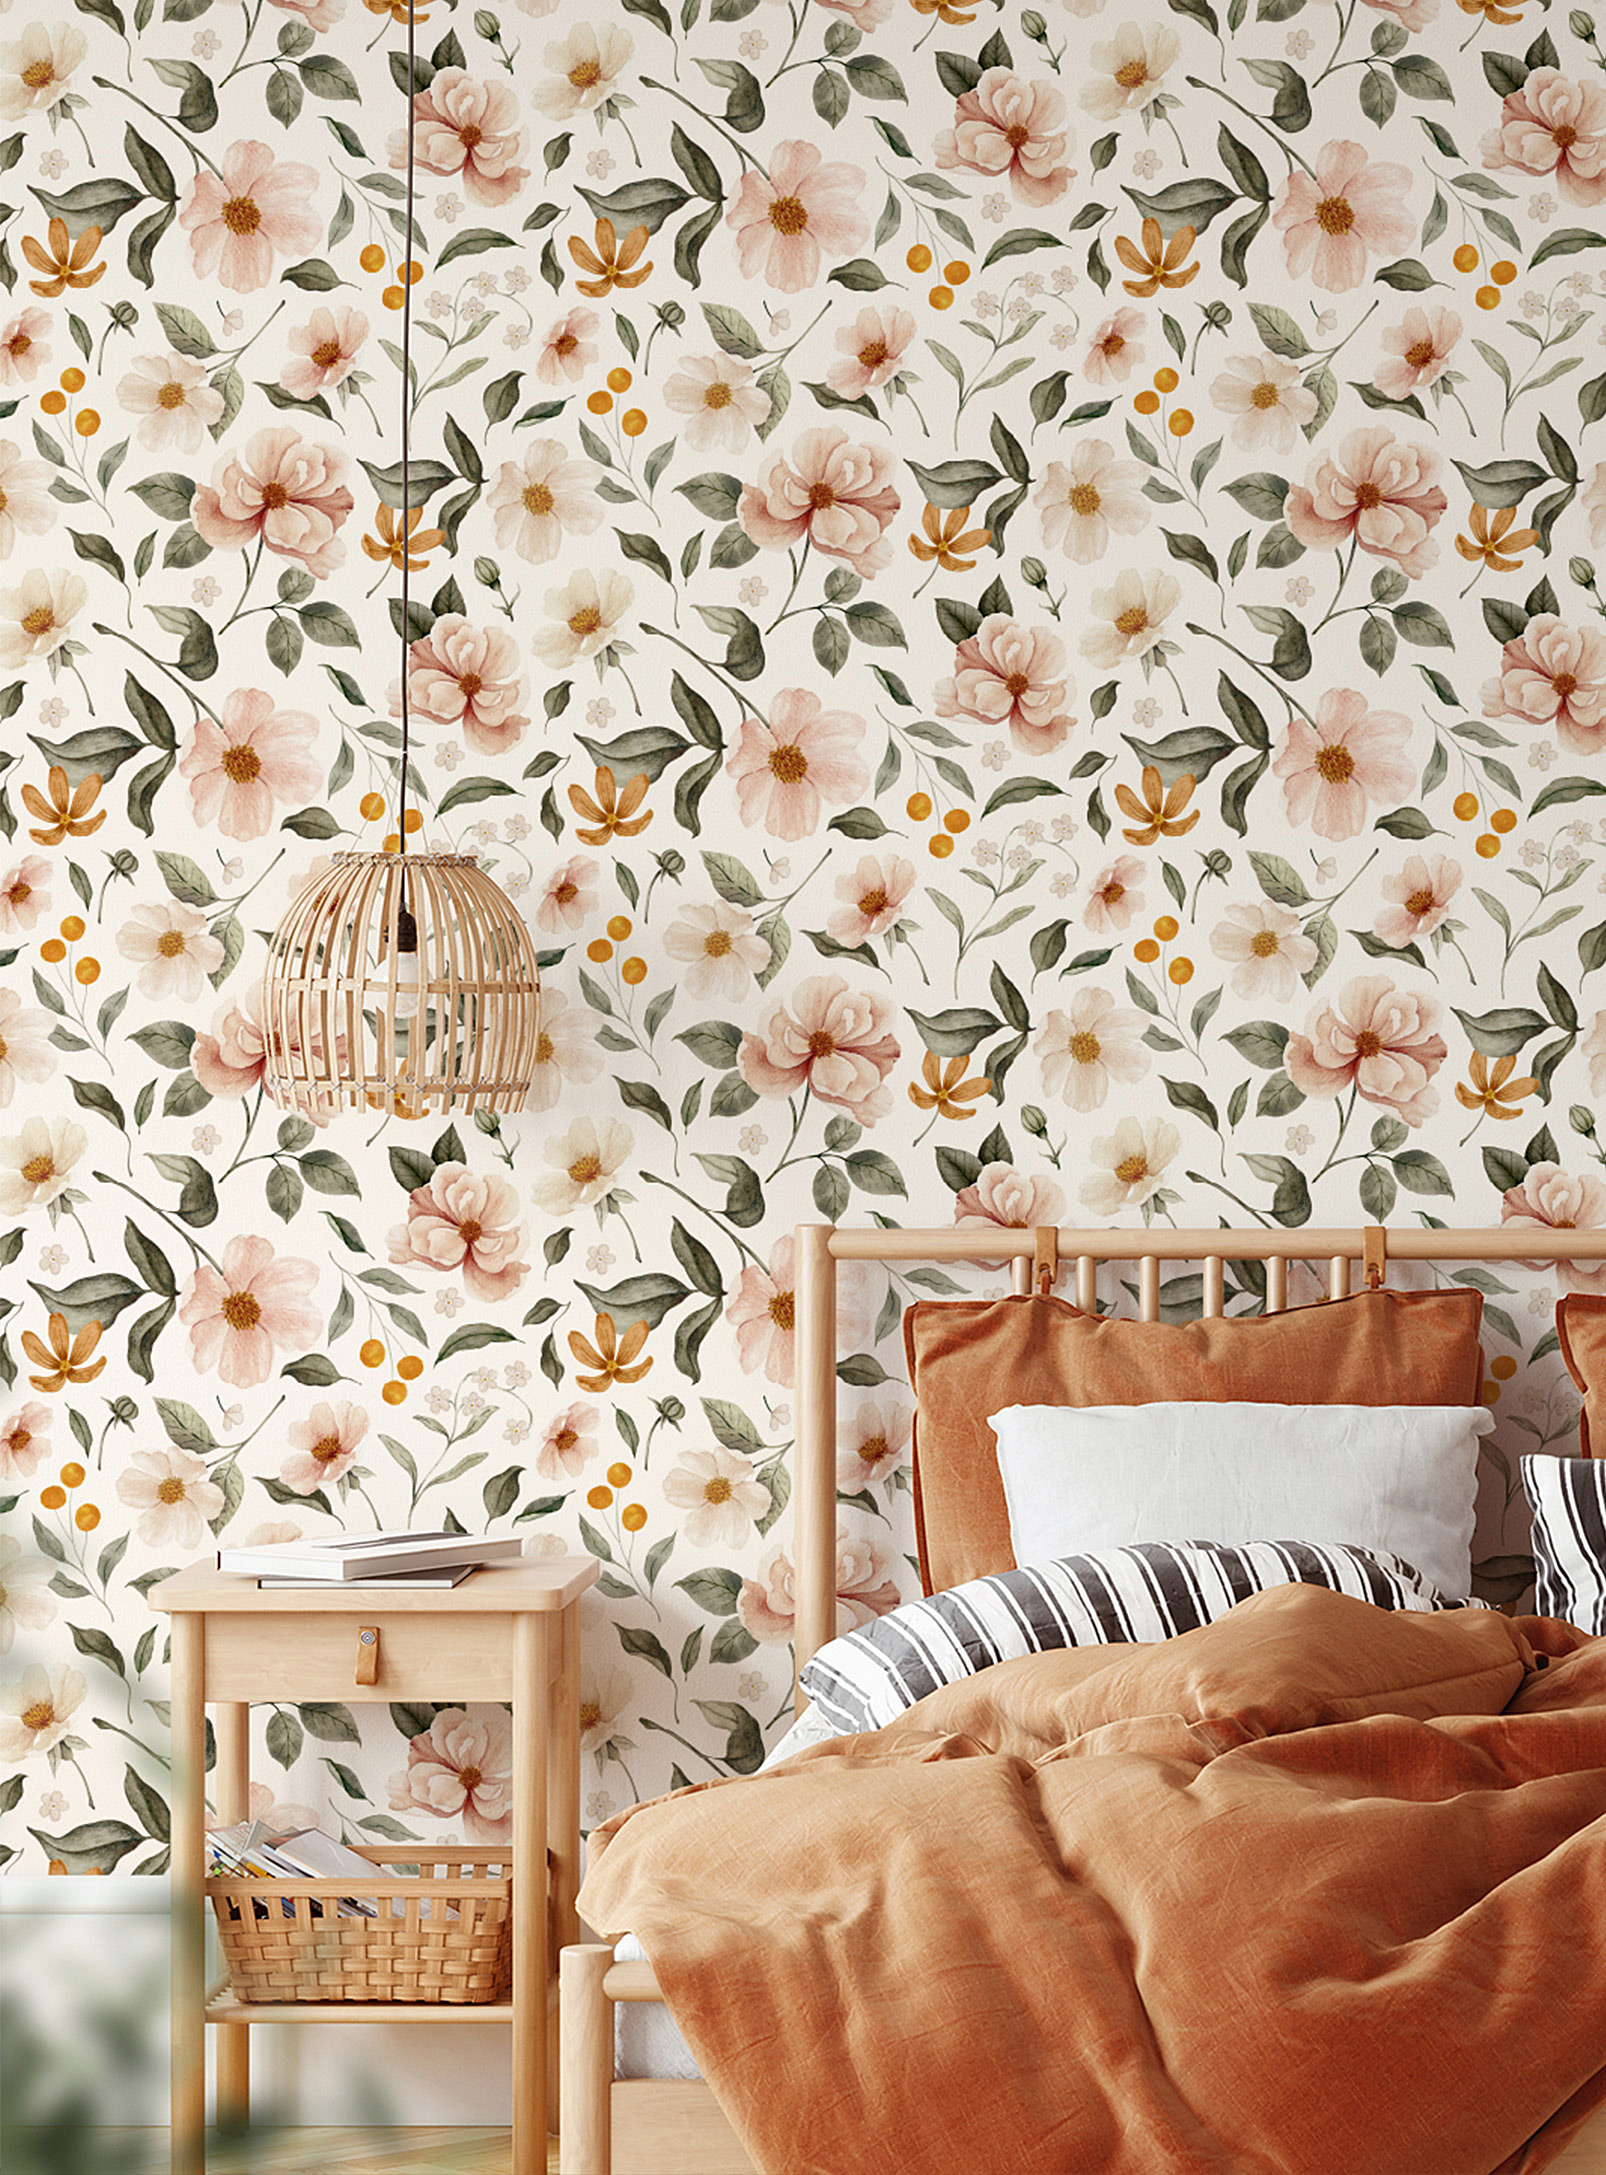 Meraki Dimanche Self-adhesive Wallpaper Strip In Collaboration With Artist Marie-lise Leclerc In Patterned White